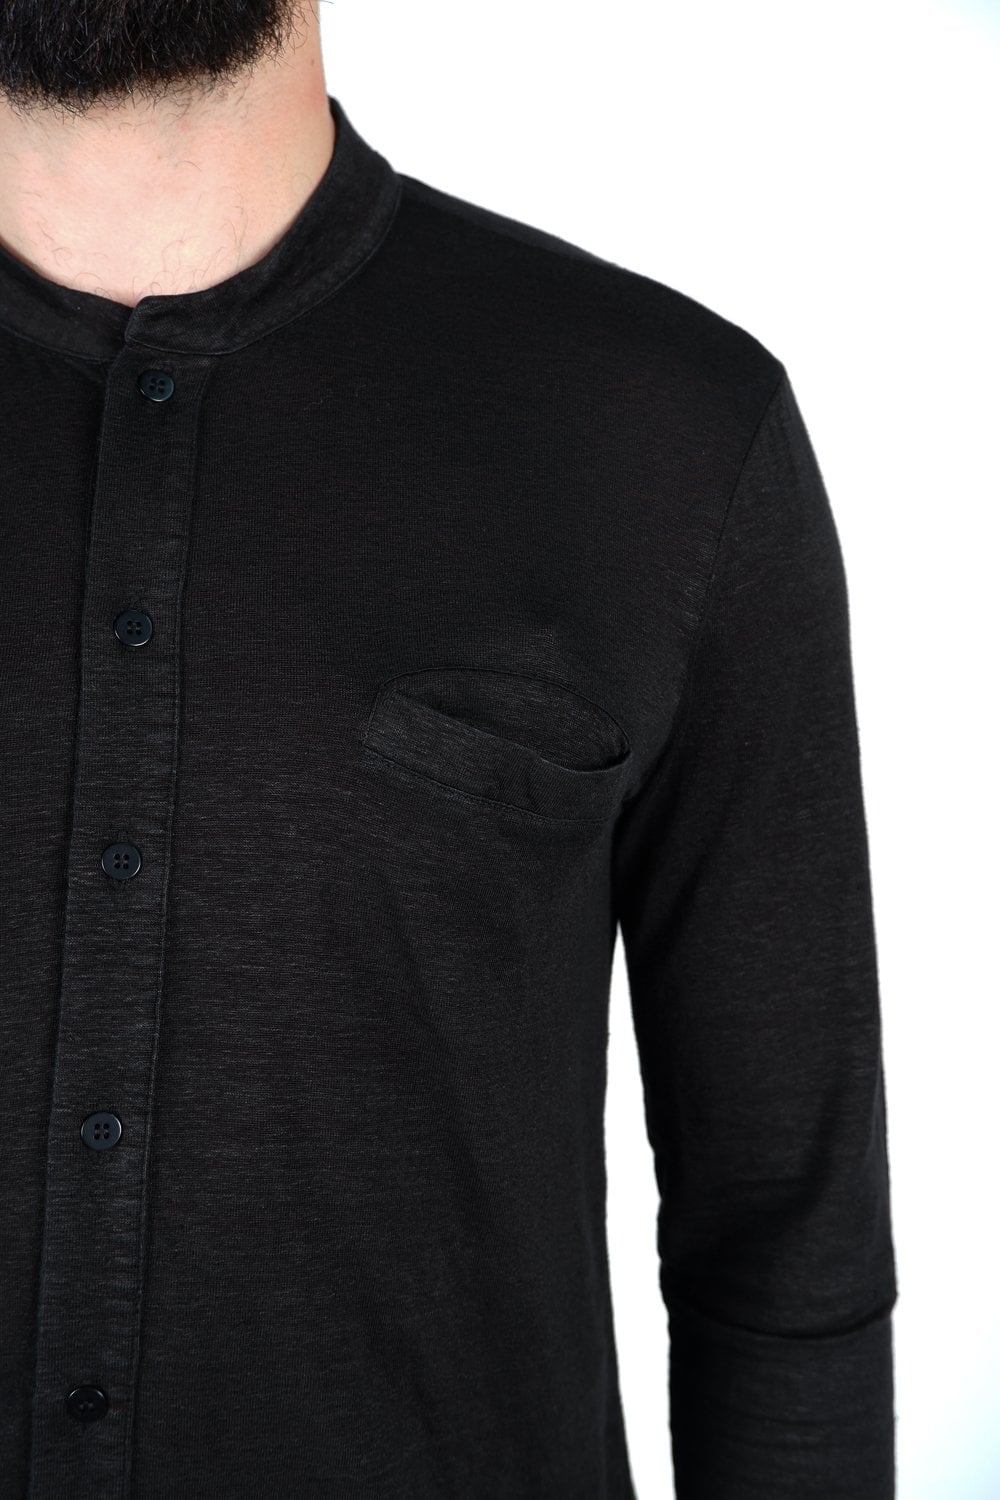 Buy the Daniele Fiesoli Button Closure L/S Shirt in Black at Intro. Spend £50 for free UK delivery. Official stockists. We ship worldwide.